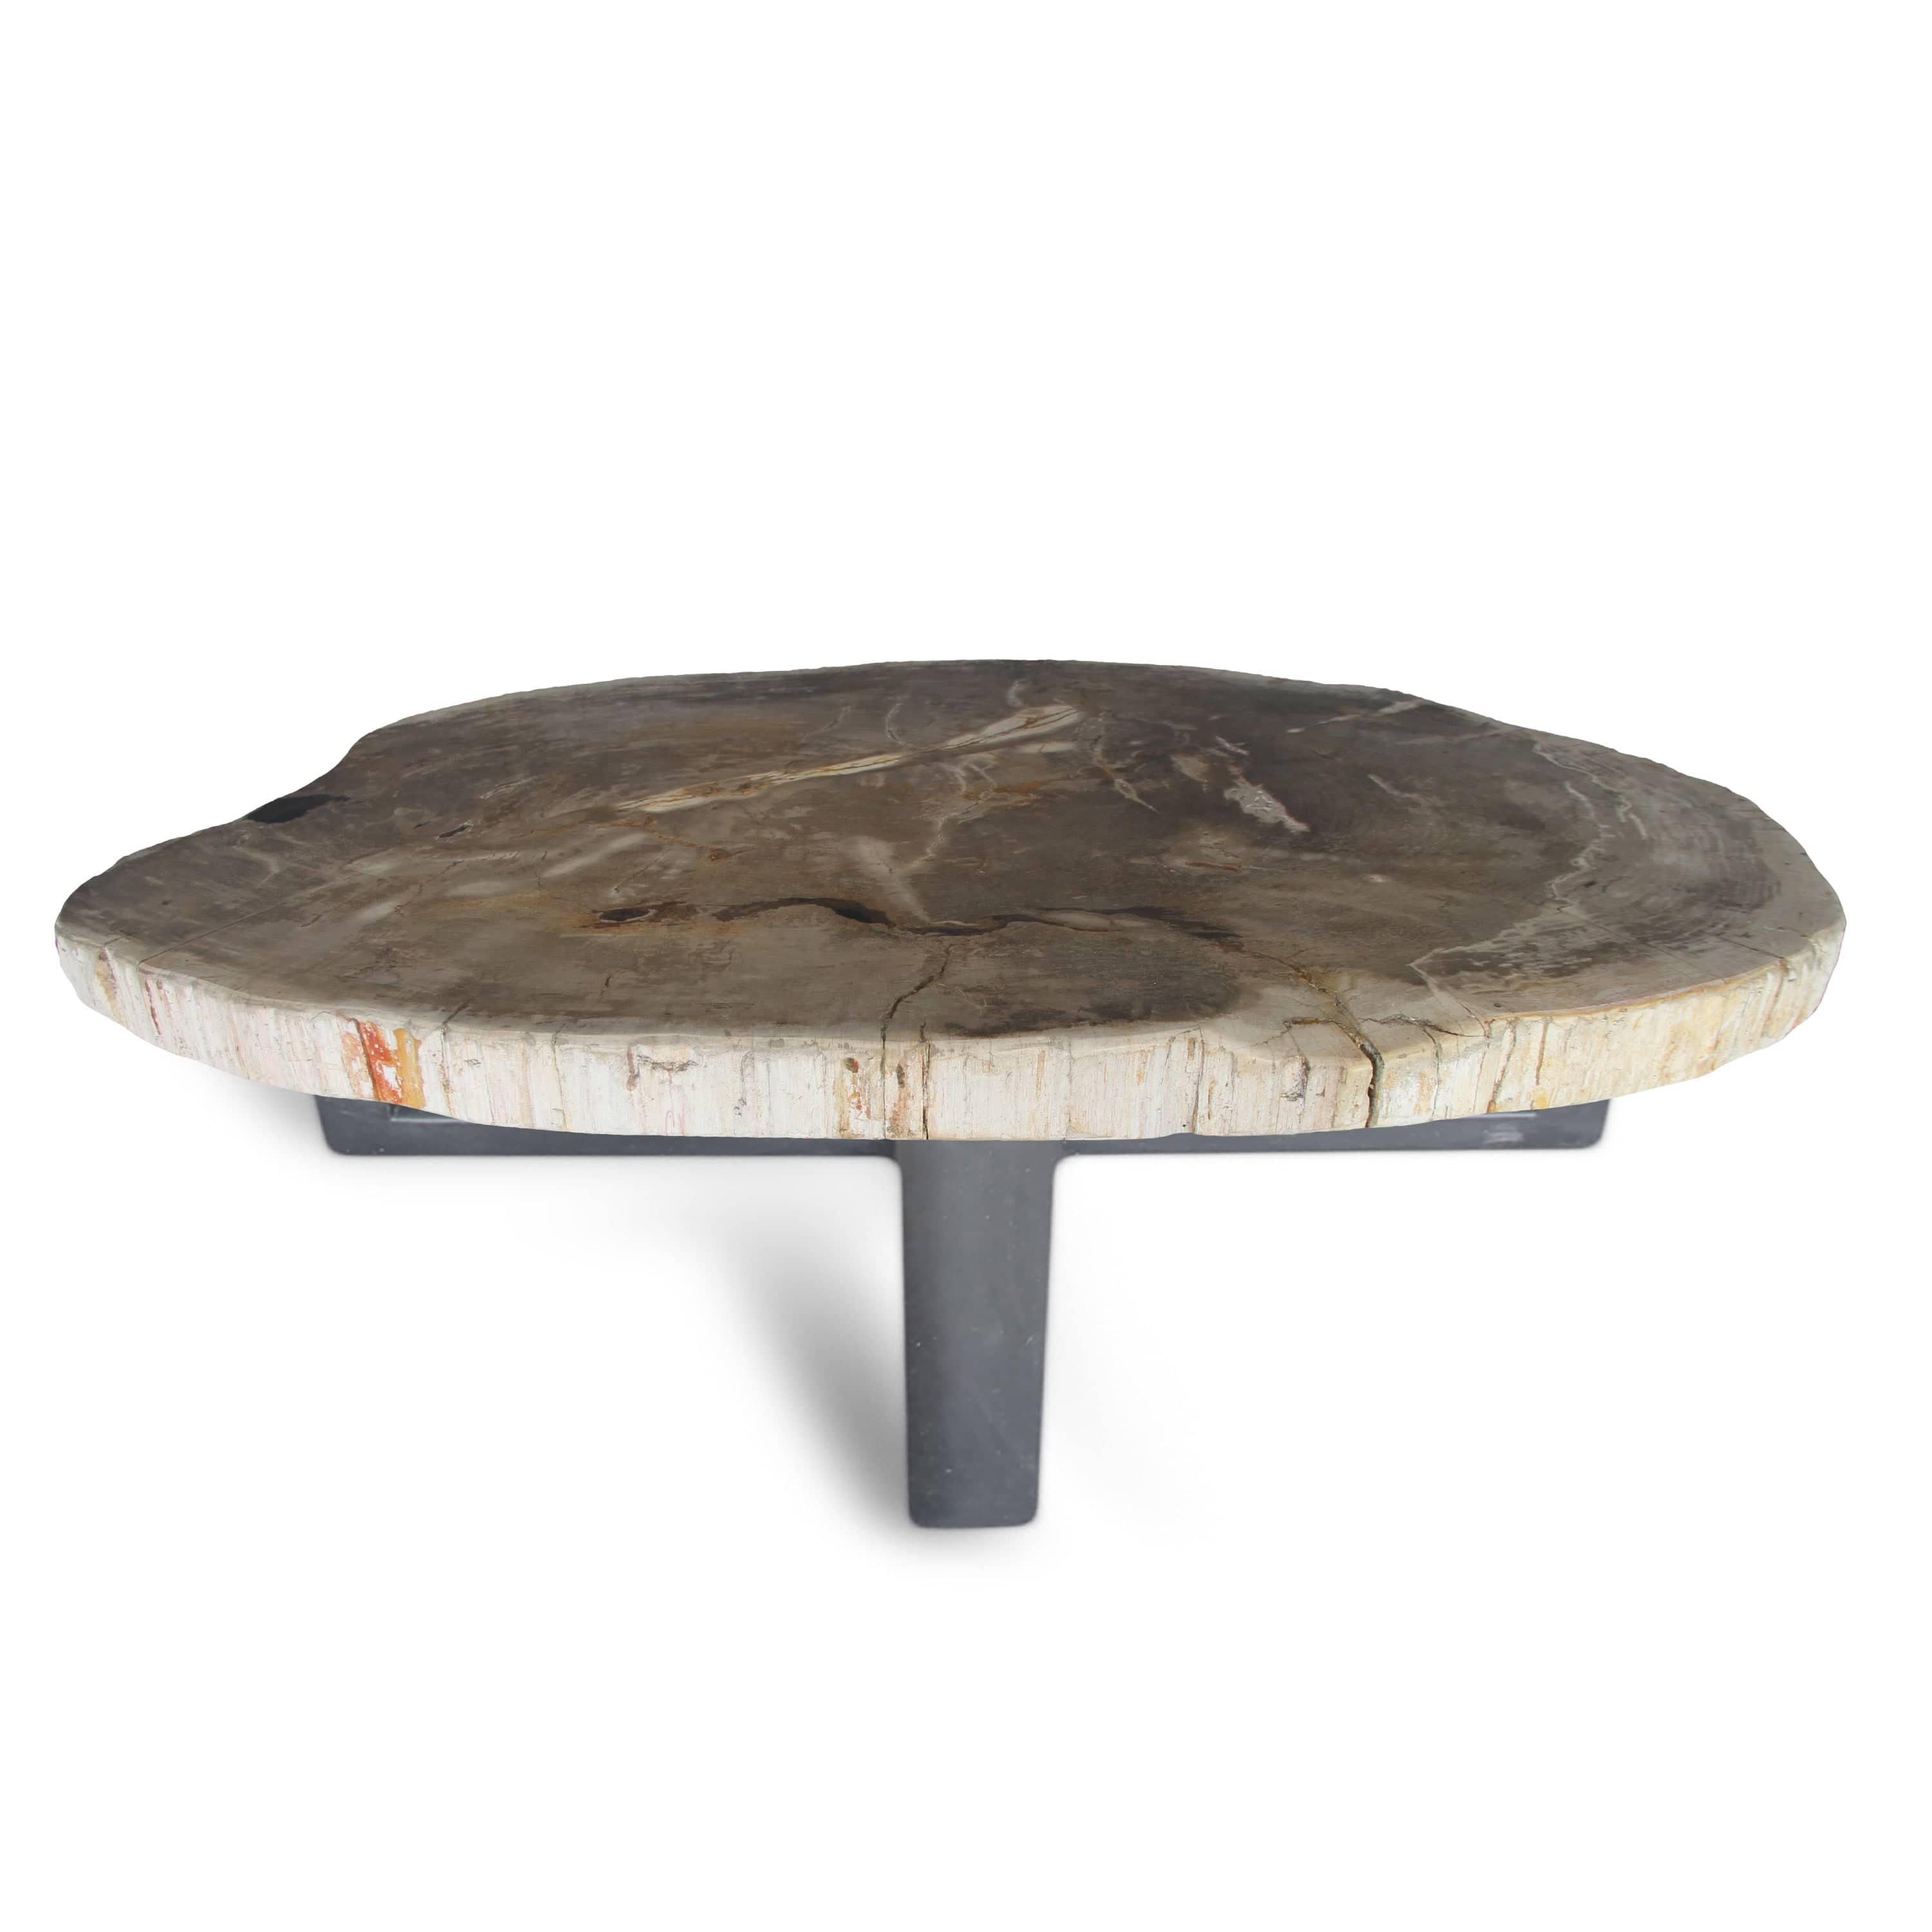 Kalifano Petrified Wood Petrified Wood Round Slab Coffee Table from Indonesia - 47" / 275 lbs PWT10000.005